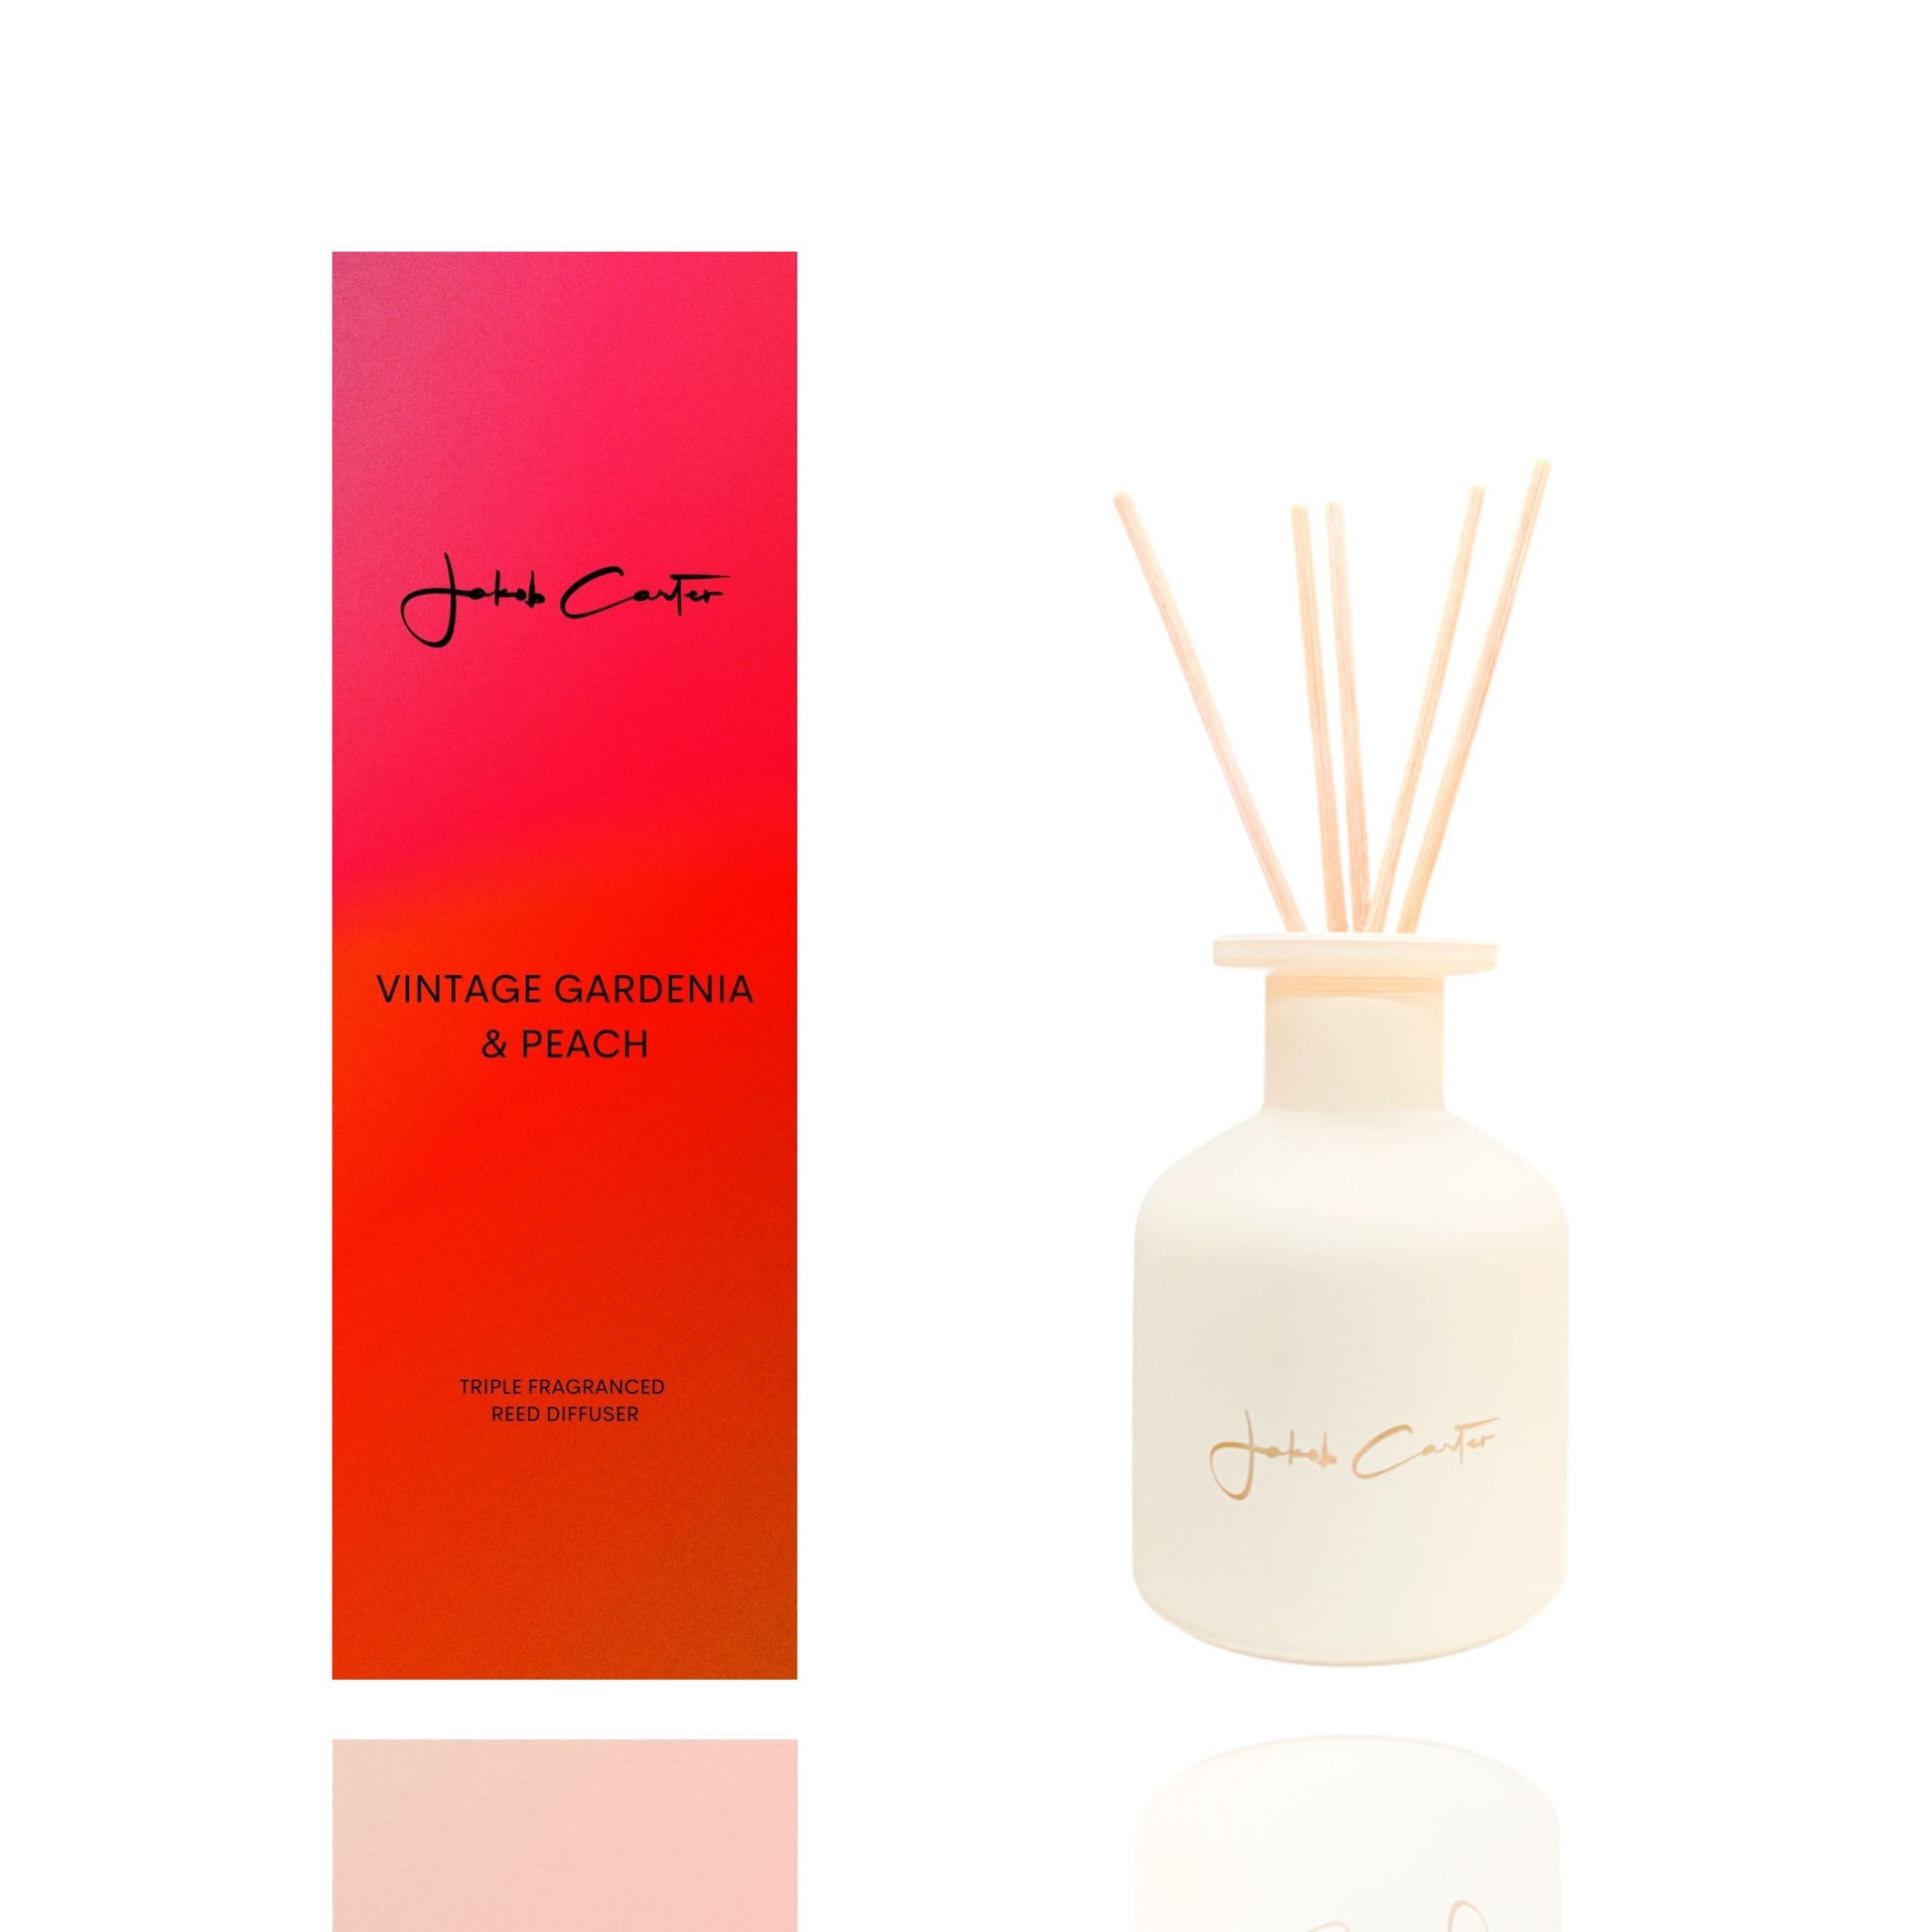 Jakob Carter Reed Diffuser in Vintage Gardenia and Peach